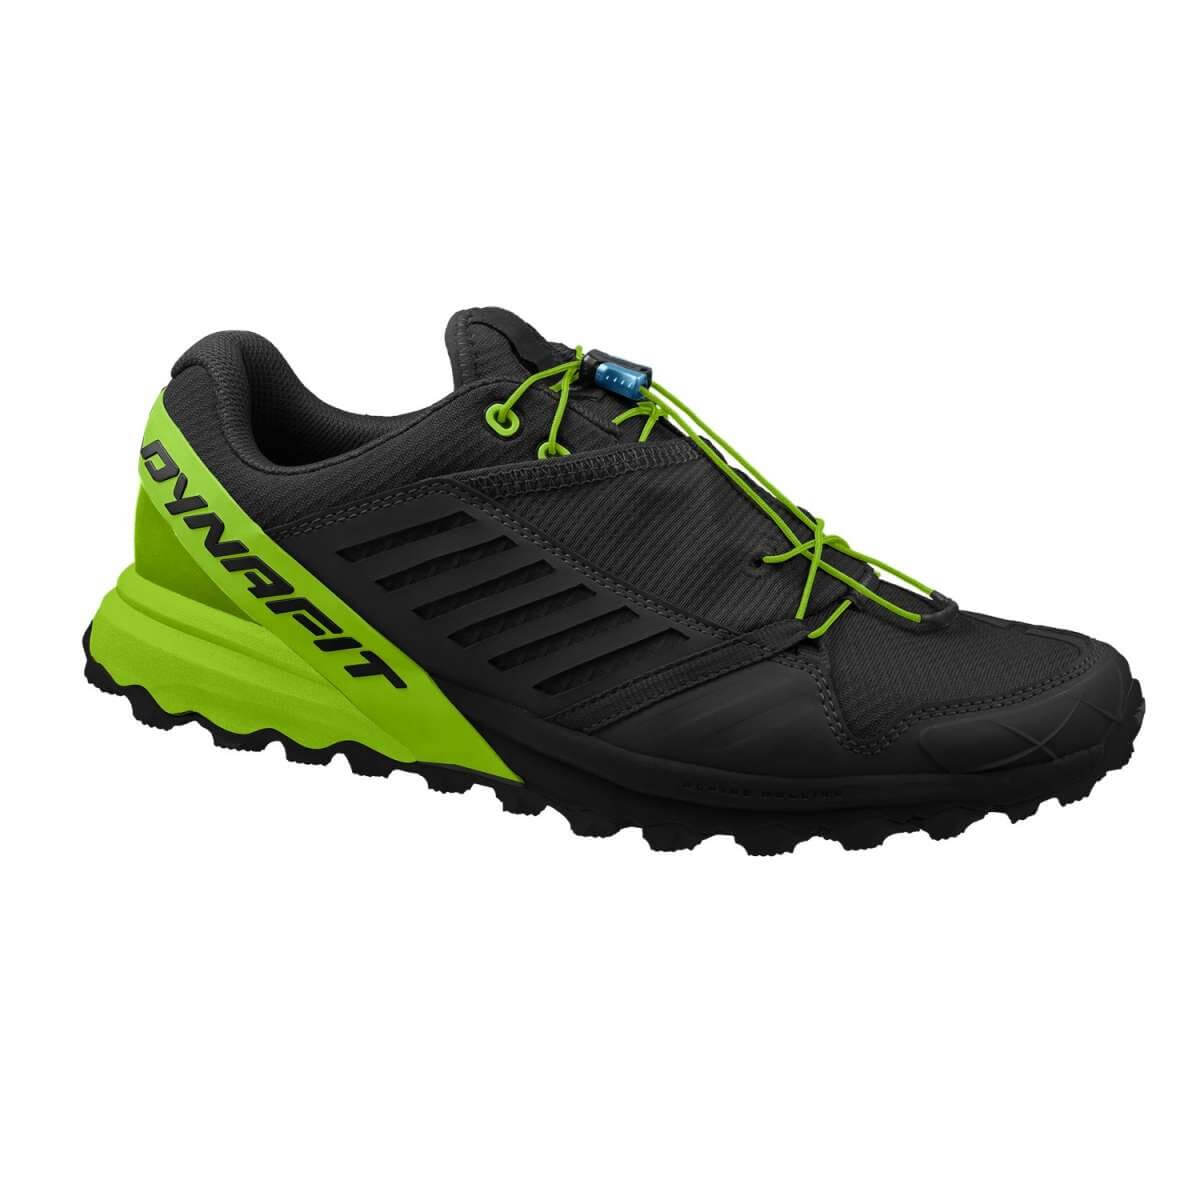 13 Best Dynafit Running Shoes Fully Reviewed & Compared | RunnerClick